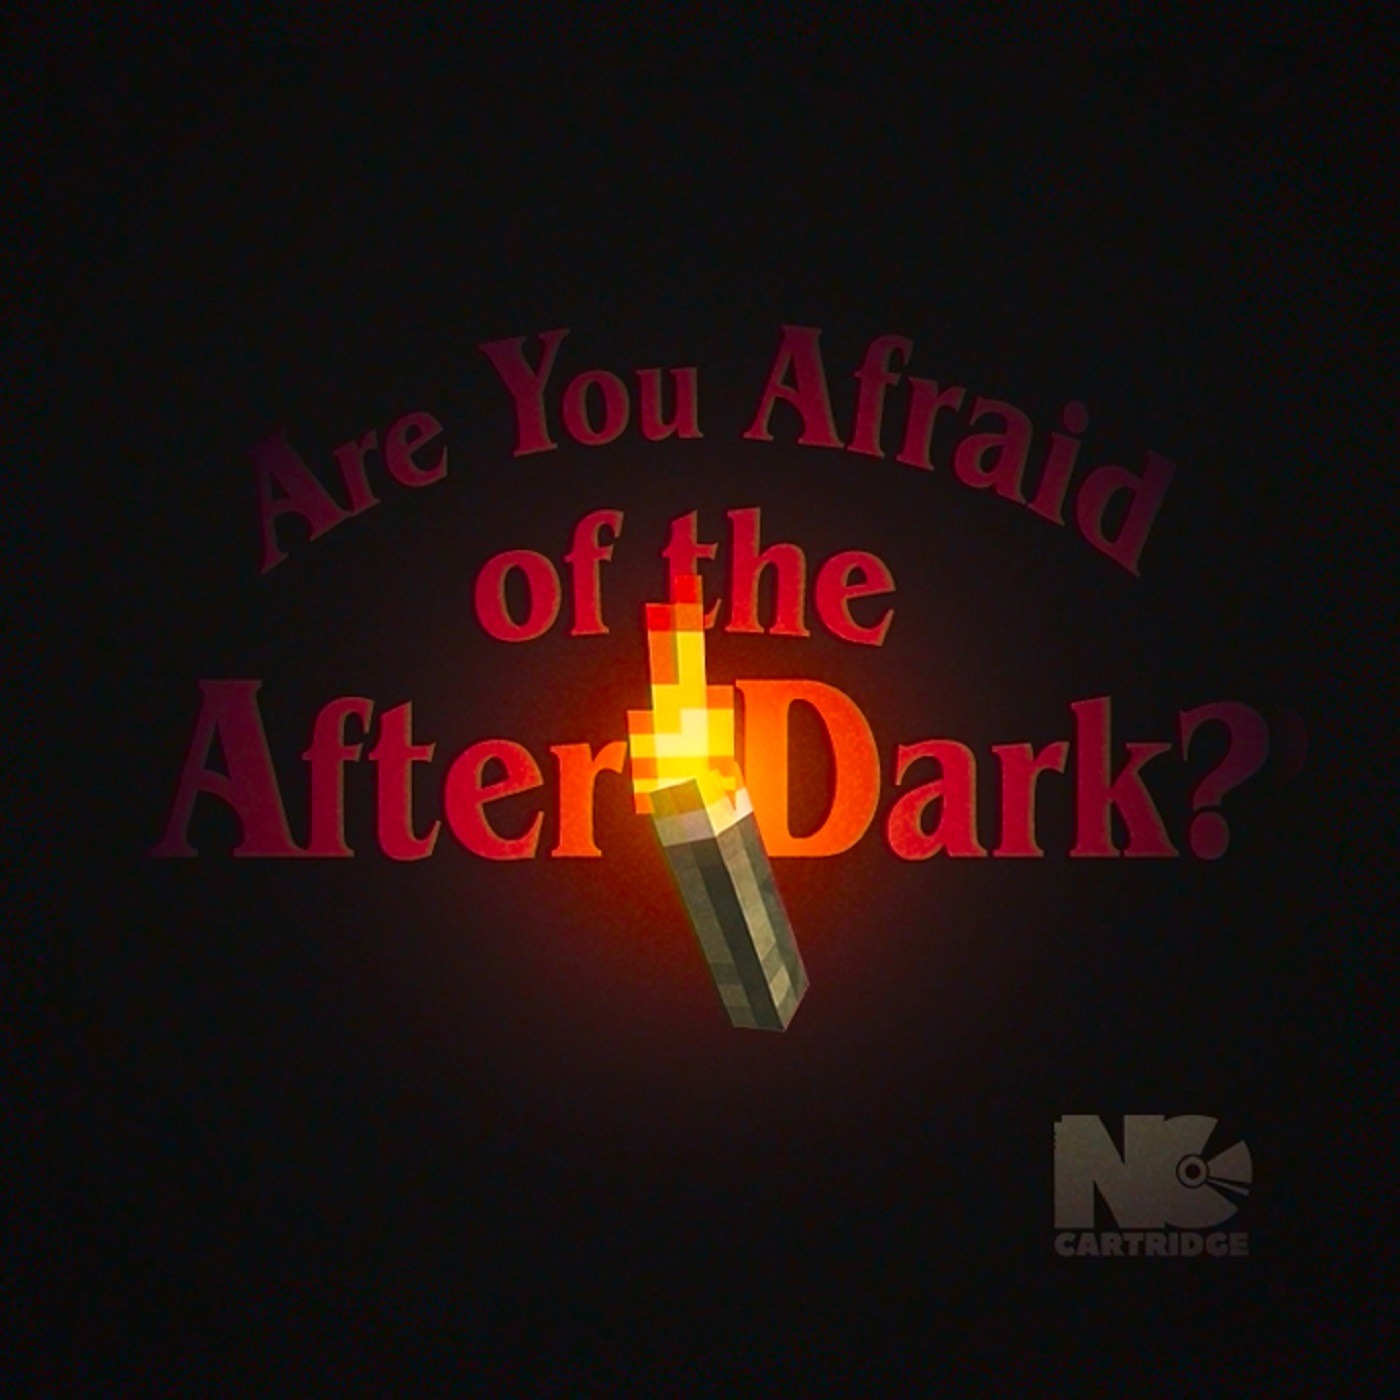 No Cartridge Presents: Are You Afraid of the After Dark 1